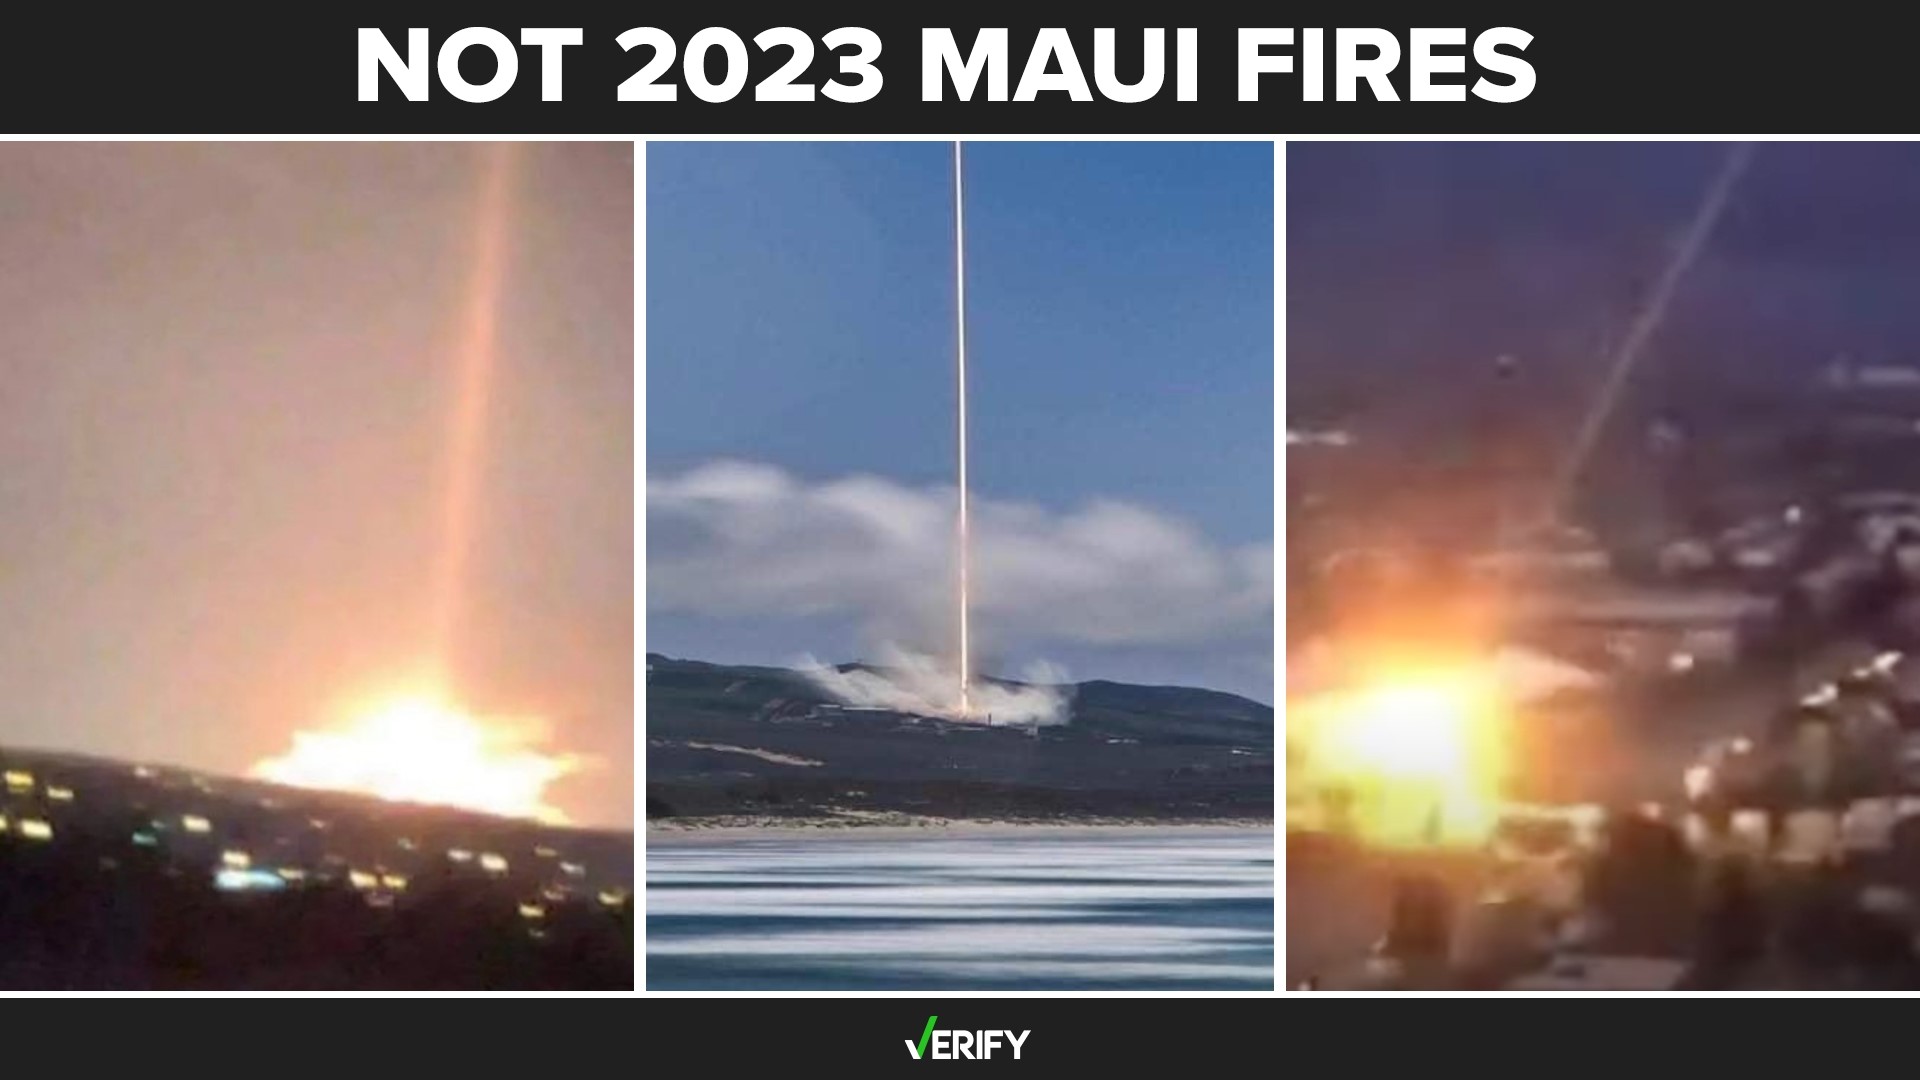 At least three viral images that appear to show laser beams have spread across social media as purported evidence of the origins of the Maui fires.